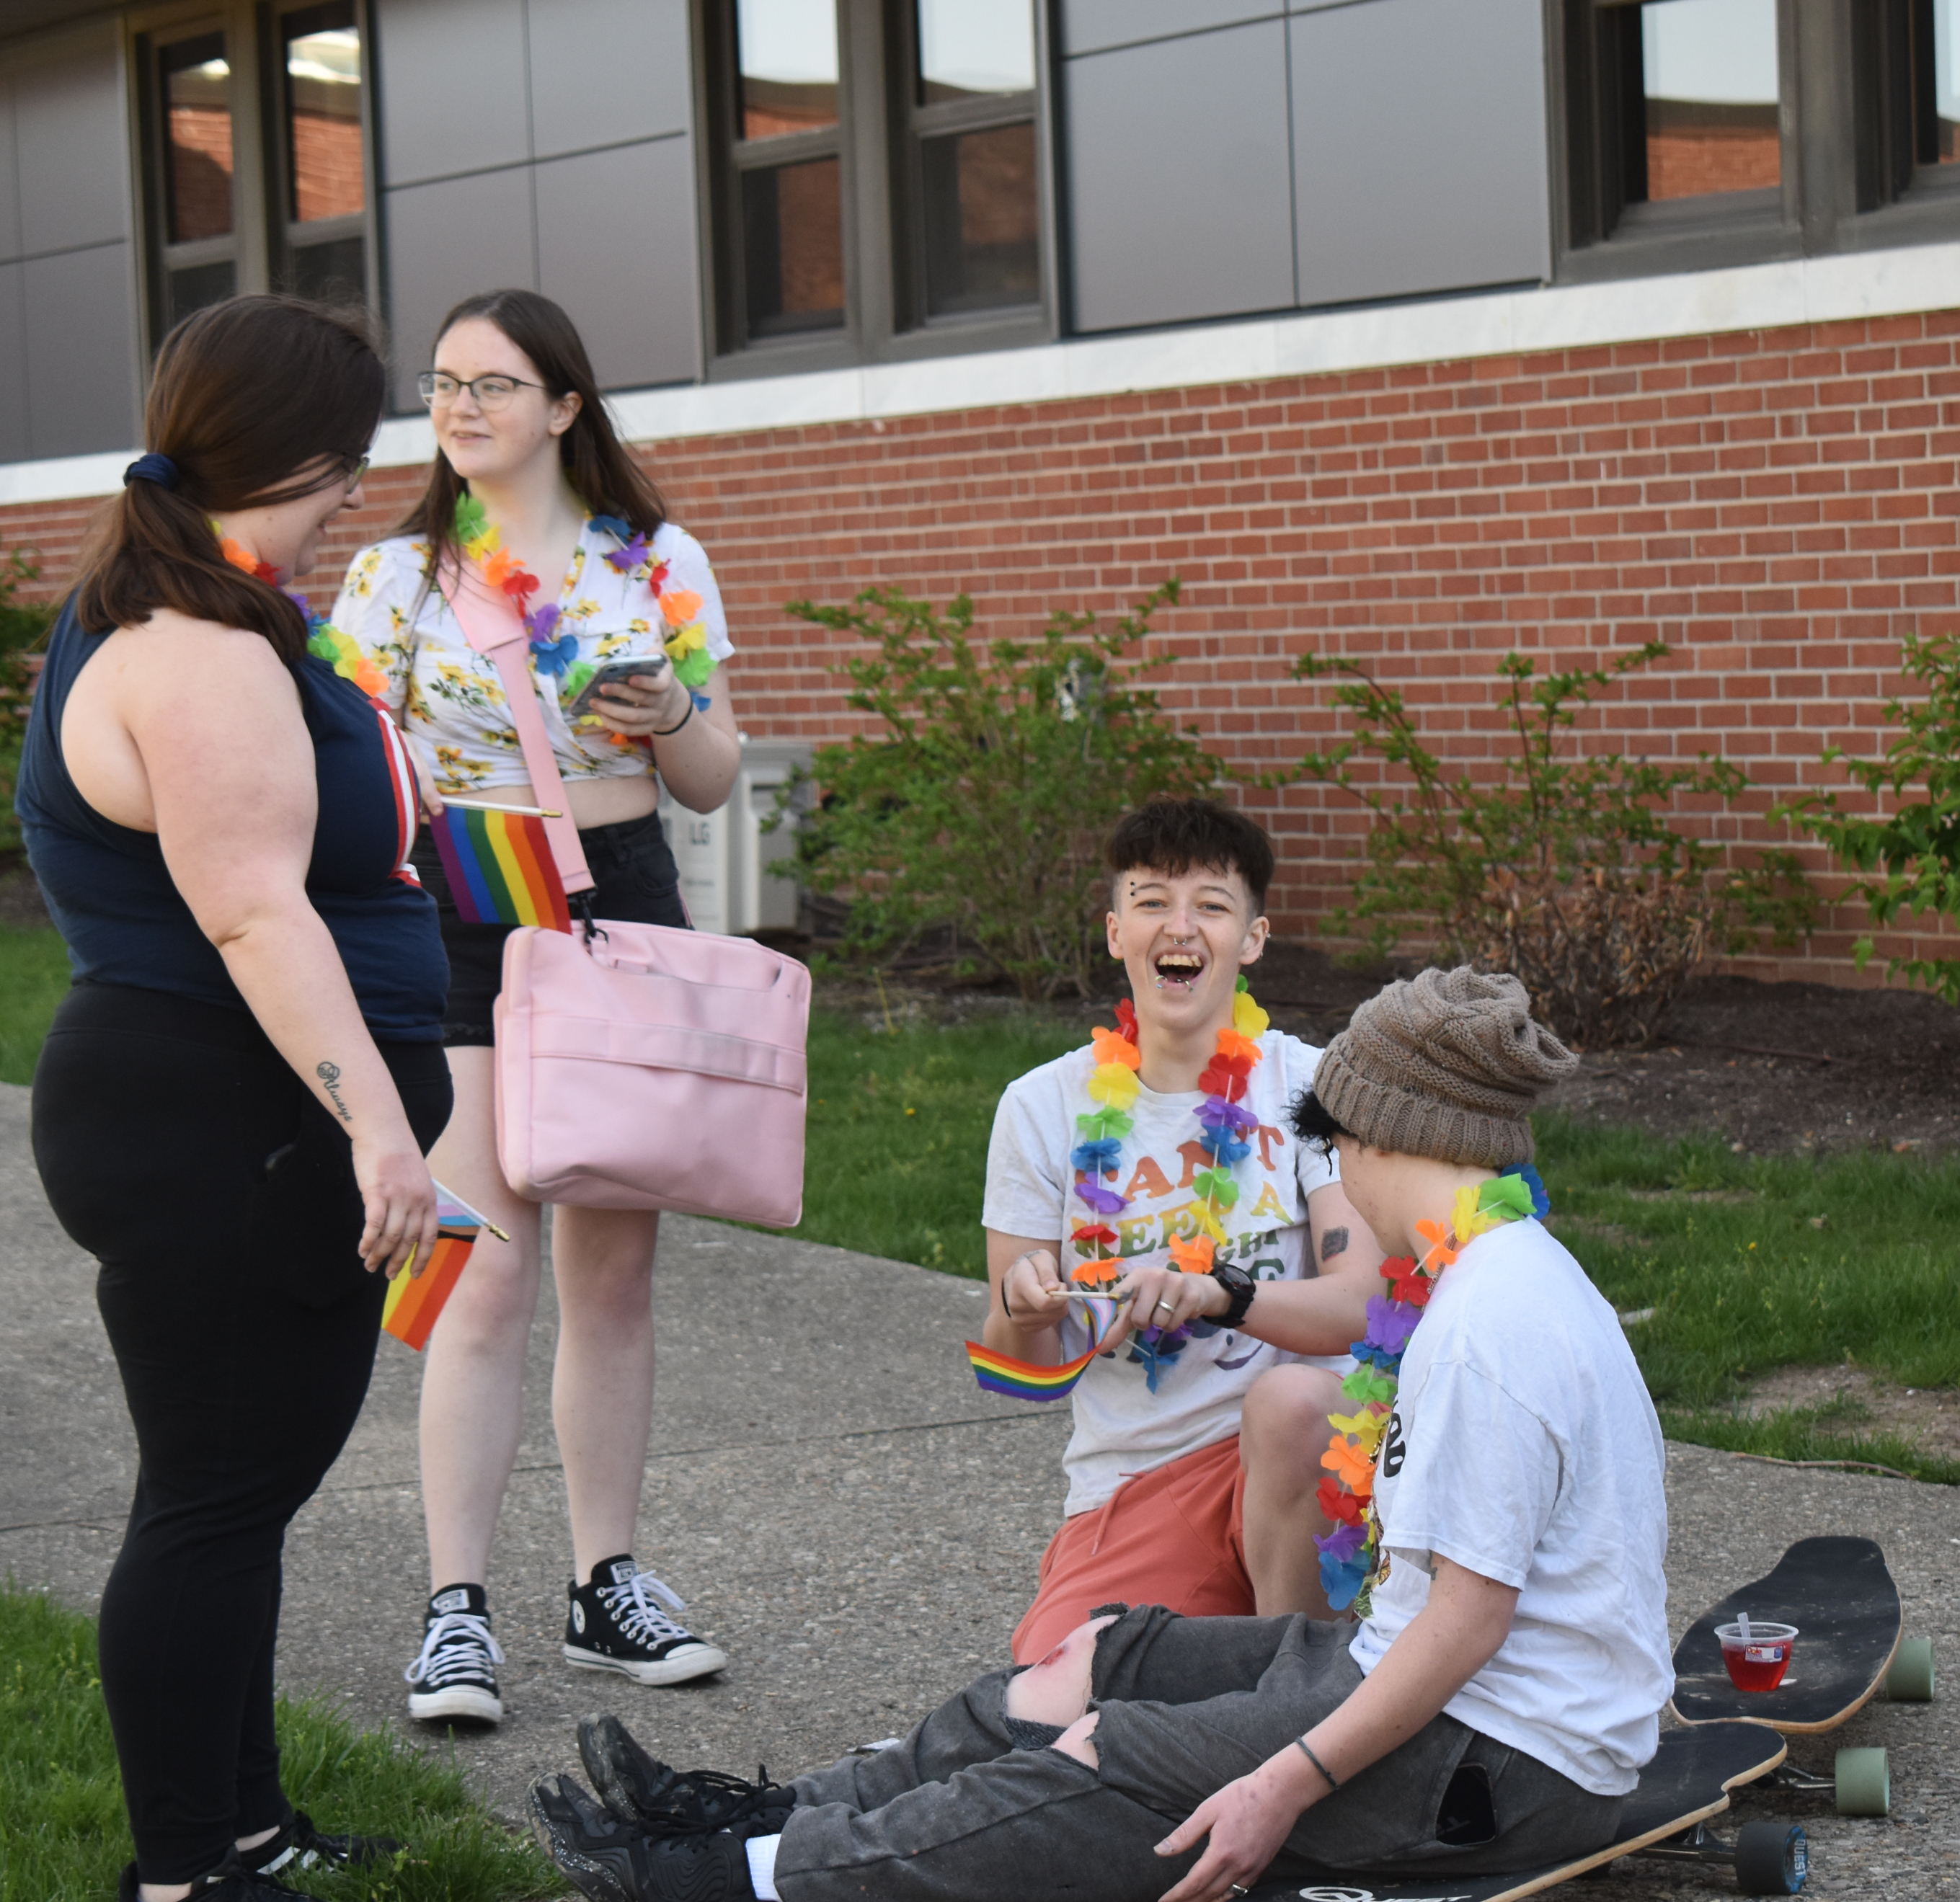 Students standing near students sitting on a skateboarder while wearing rainbow-colored clothing and accessories